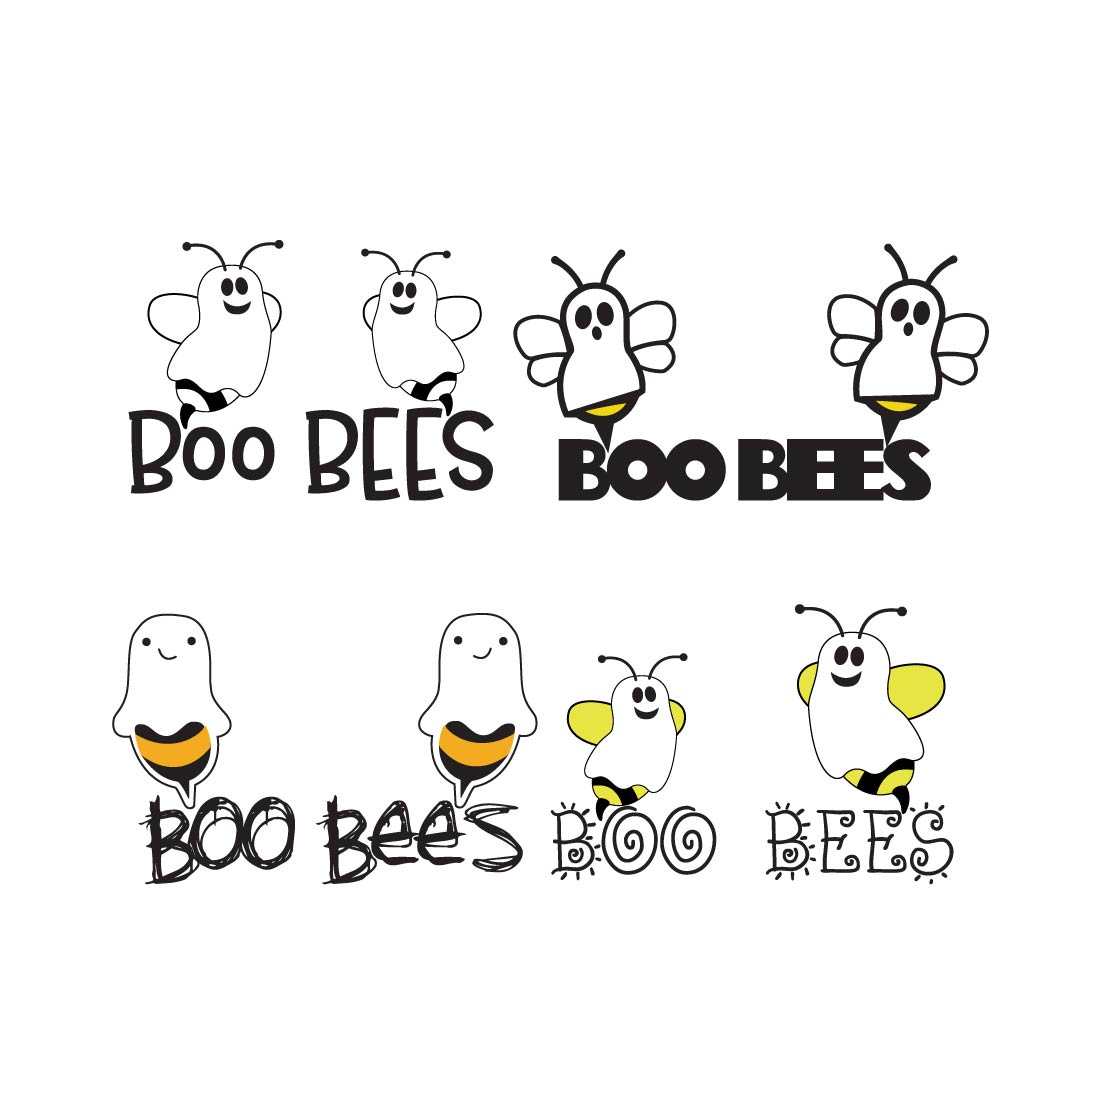 Boo bees svg, Halloween SVG, Boo SVG, Ghost SVG, Boo Bees Svg , Funny Halloween Shirt Svg, Cricut Silhouette cut file,Boo bees svg bundle preview image.